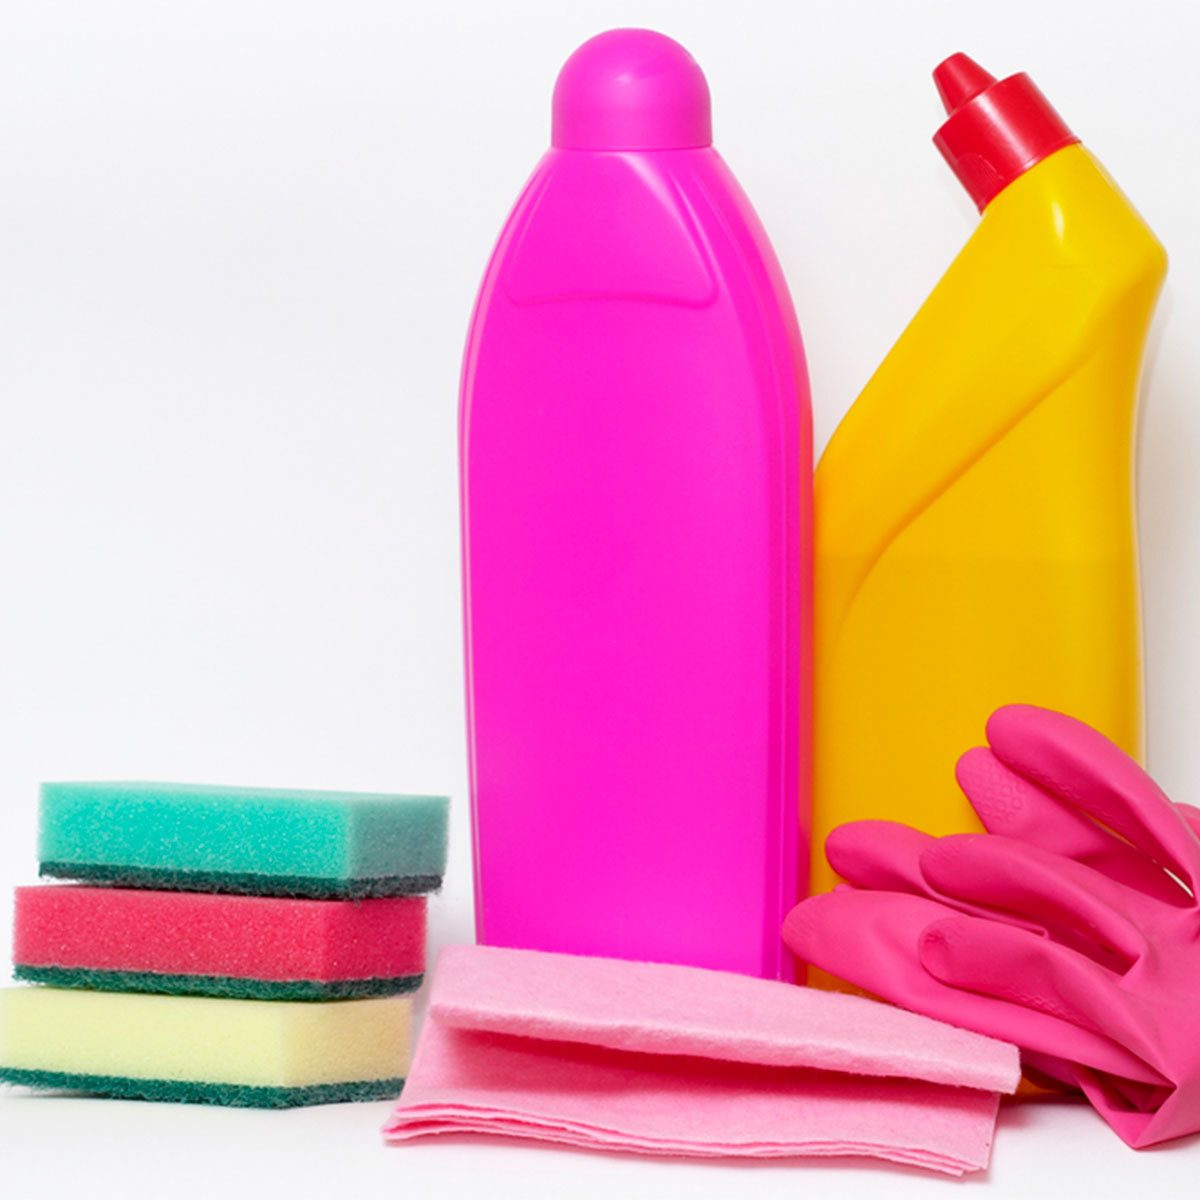 3 Ways to Save Money on Household Cleaning Supplies - wikiHow Life